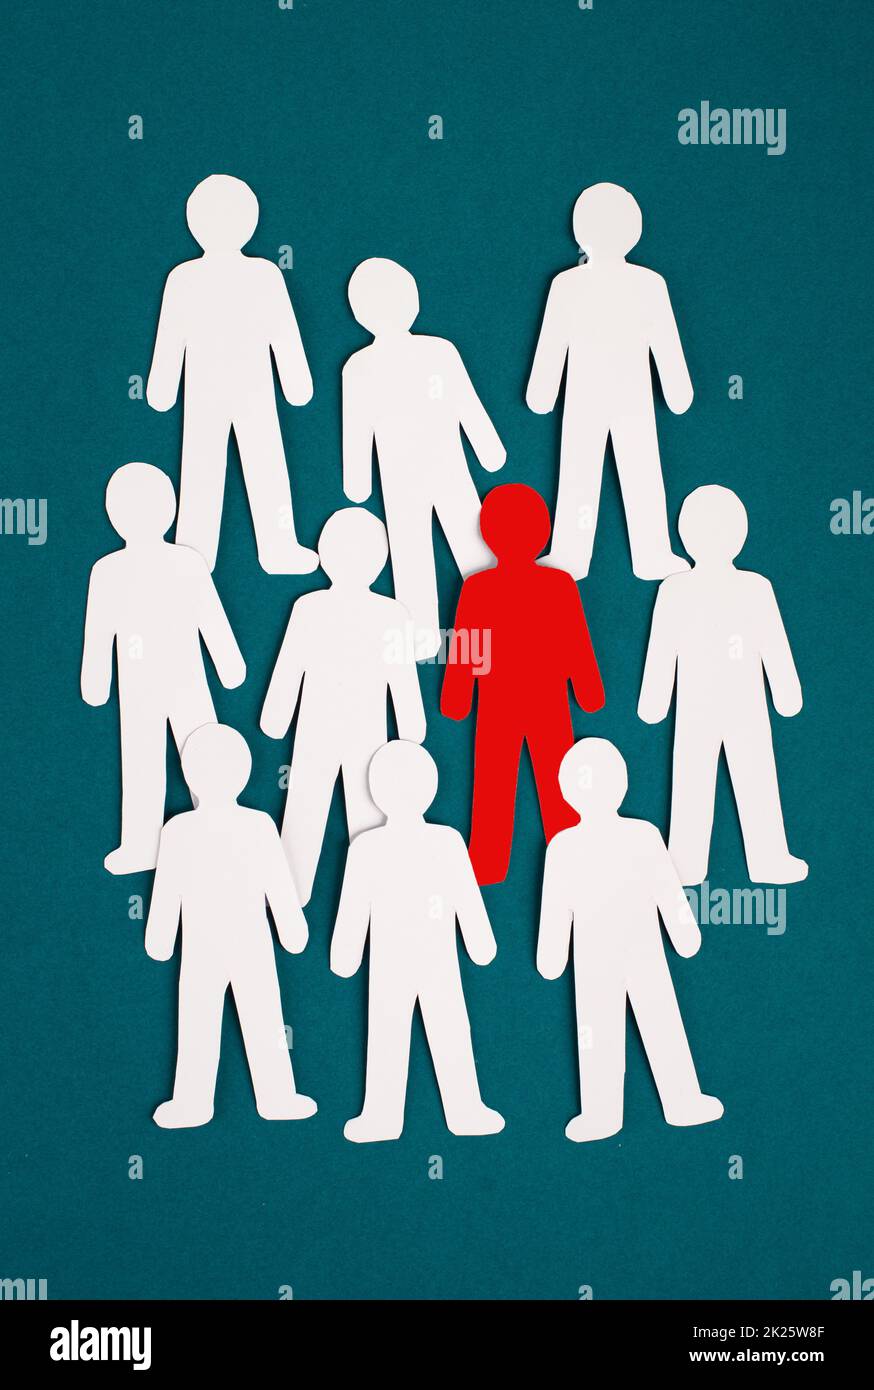 Group of people, one person is standing out from the crowd, concept leadership, manager of team, paper cut out Stock Photo